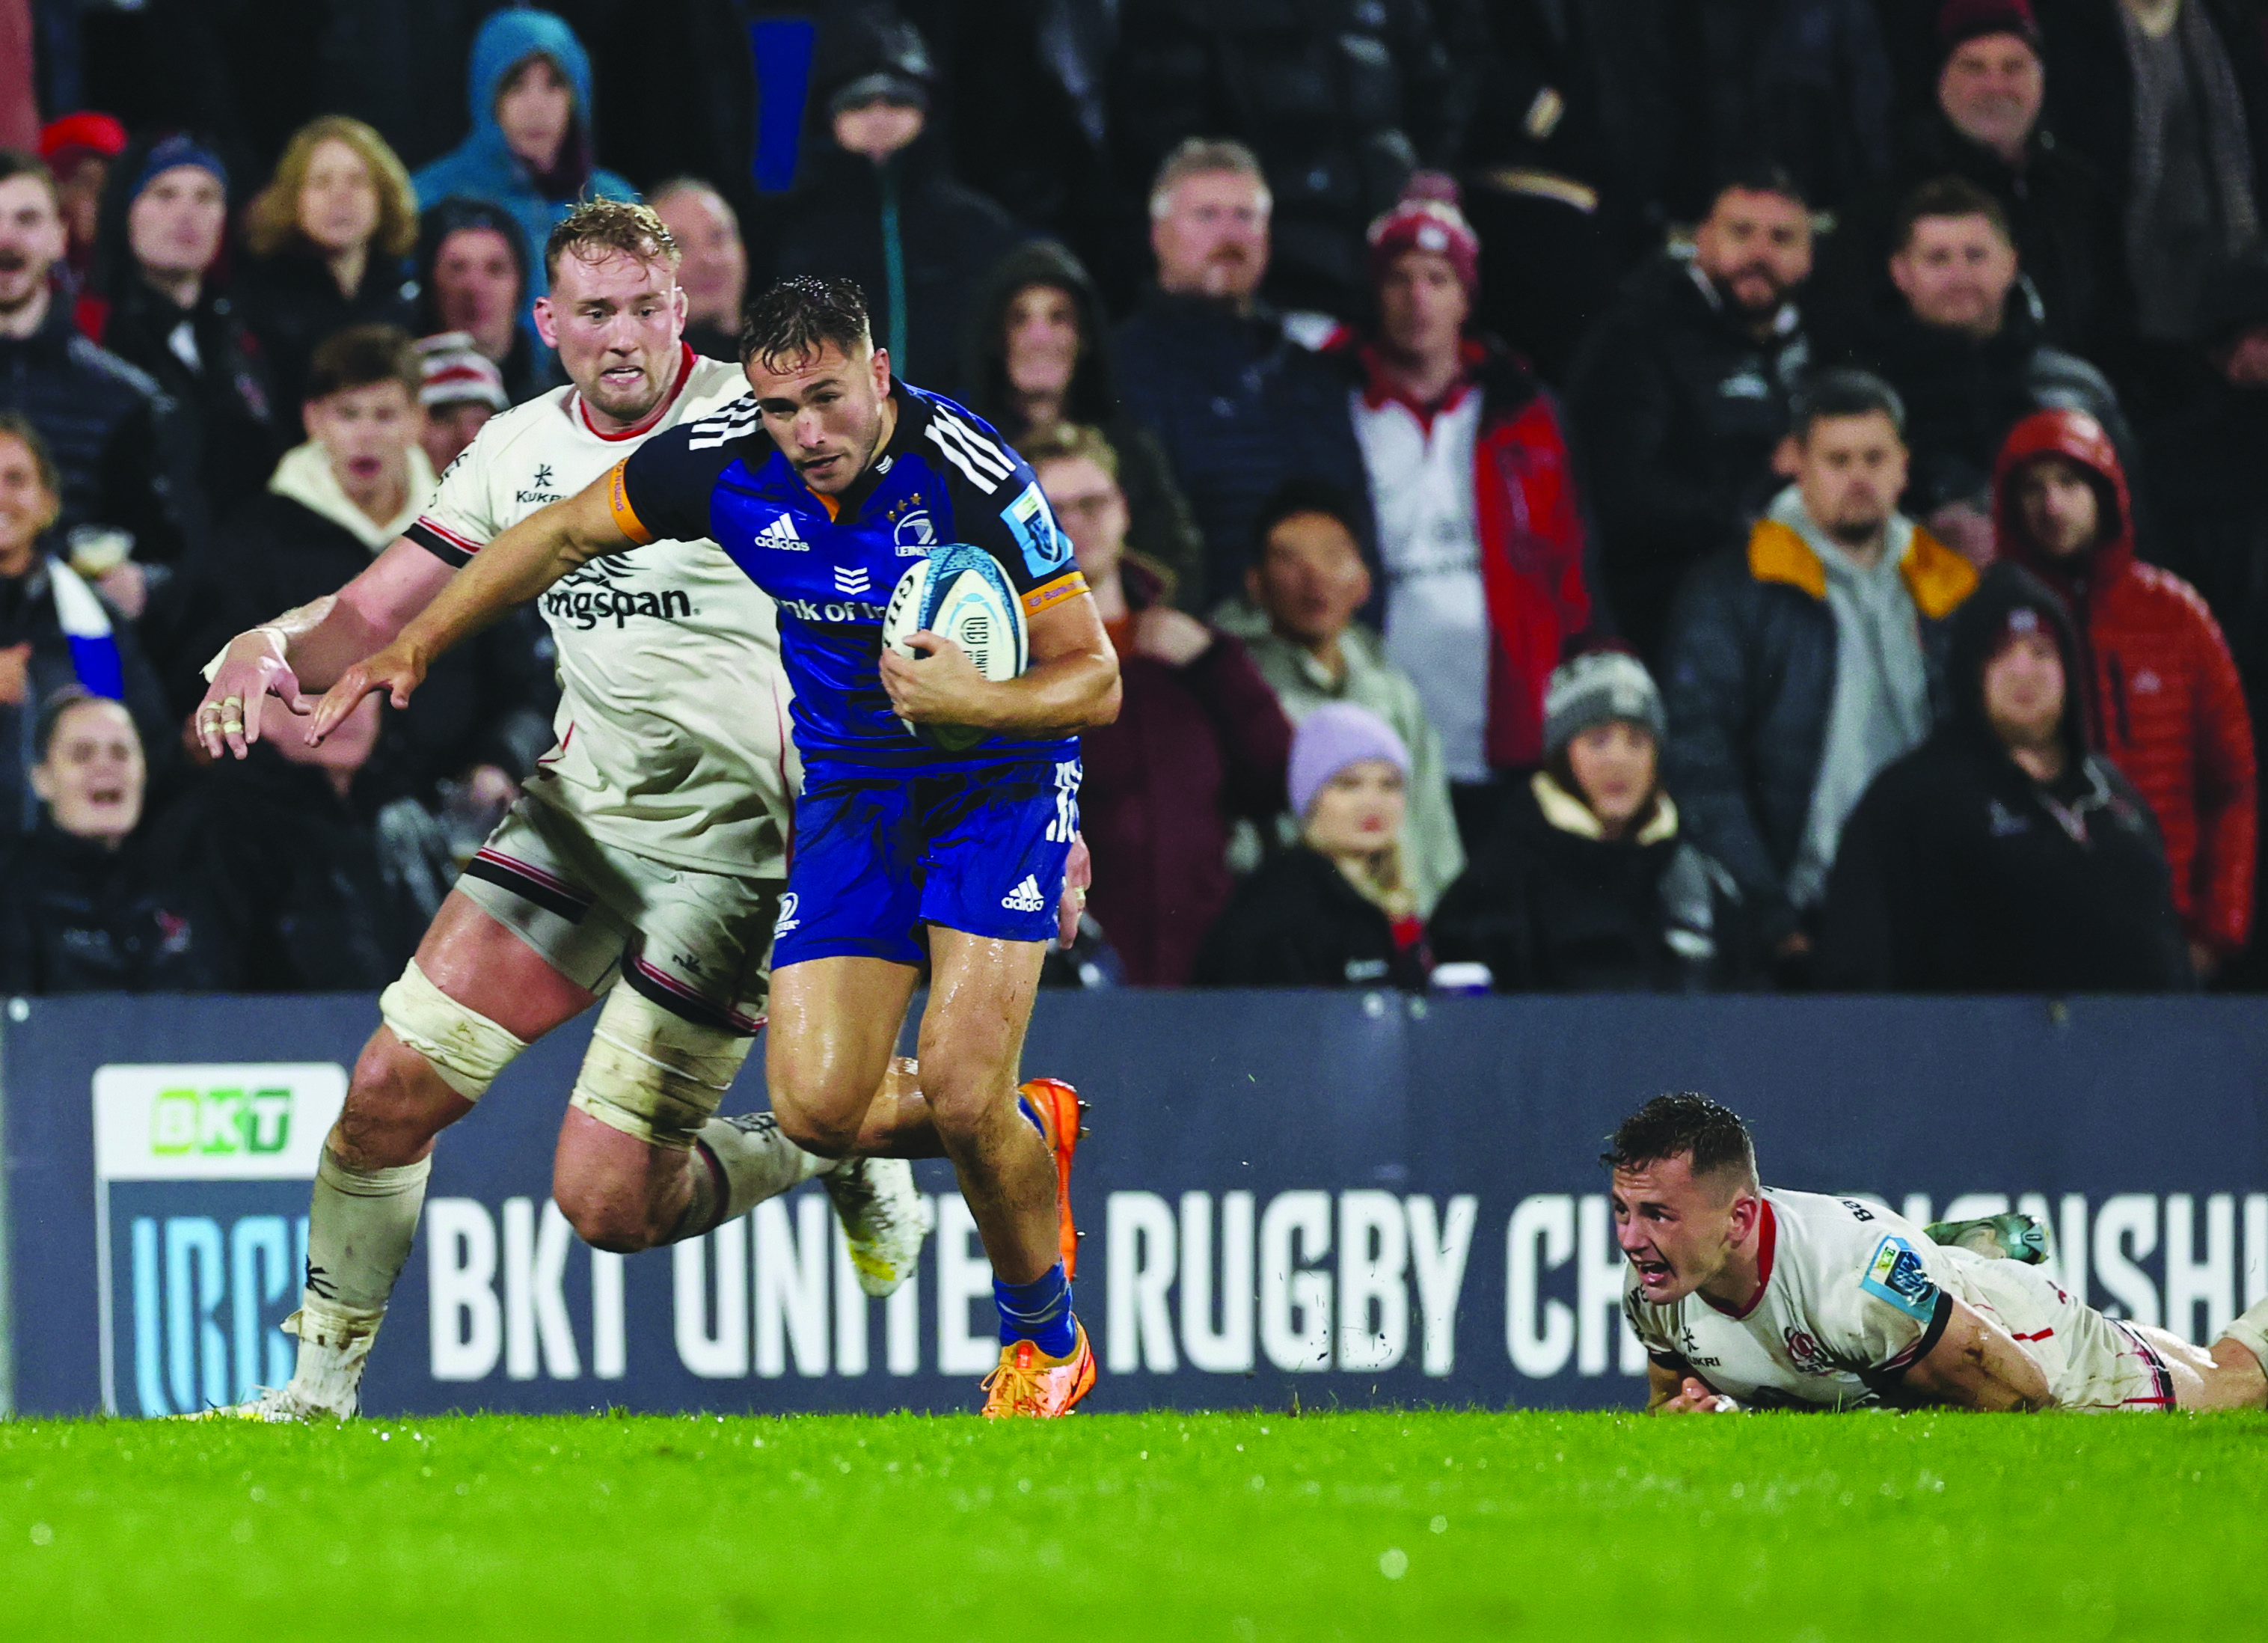 Jordan Larmour gets away from Kieran Treadwell during Leinster’s win over Ulster in Belfast back in September